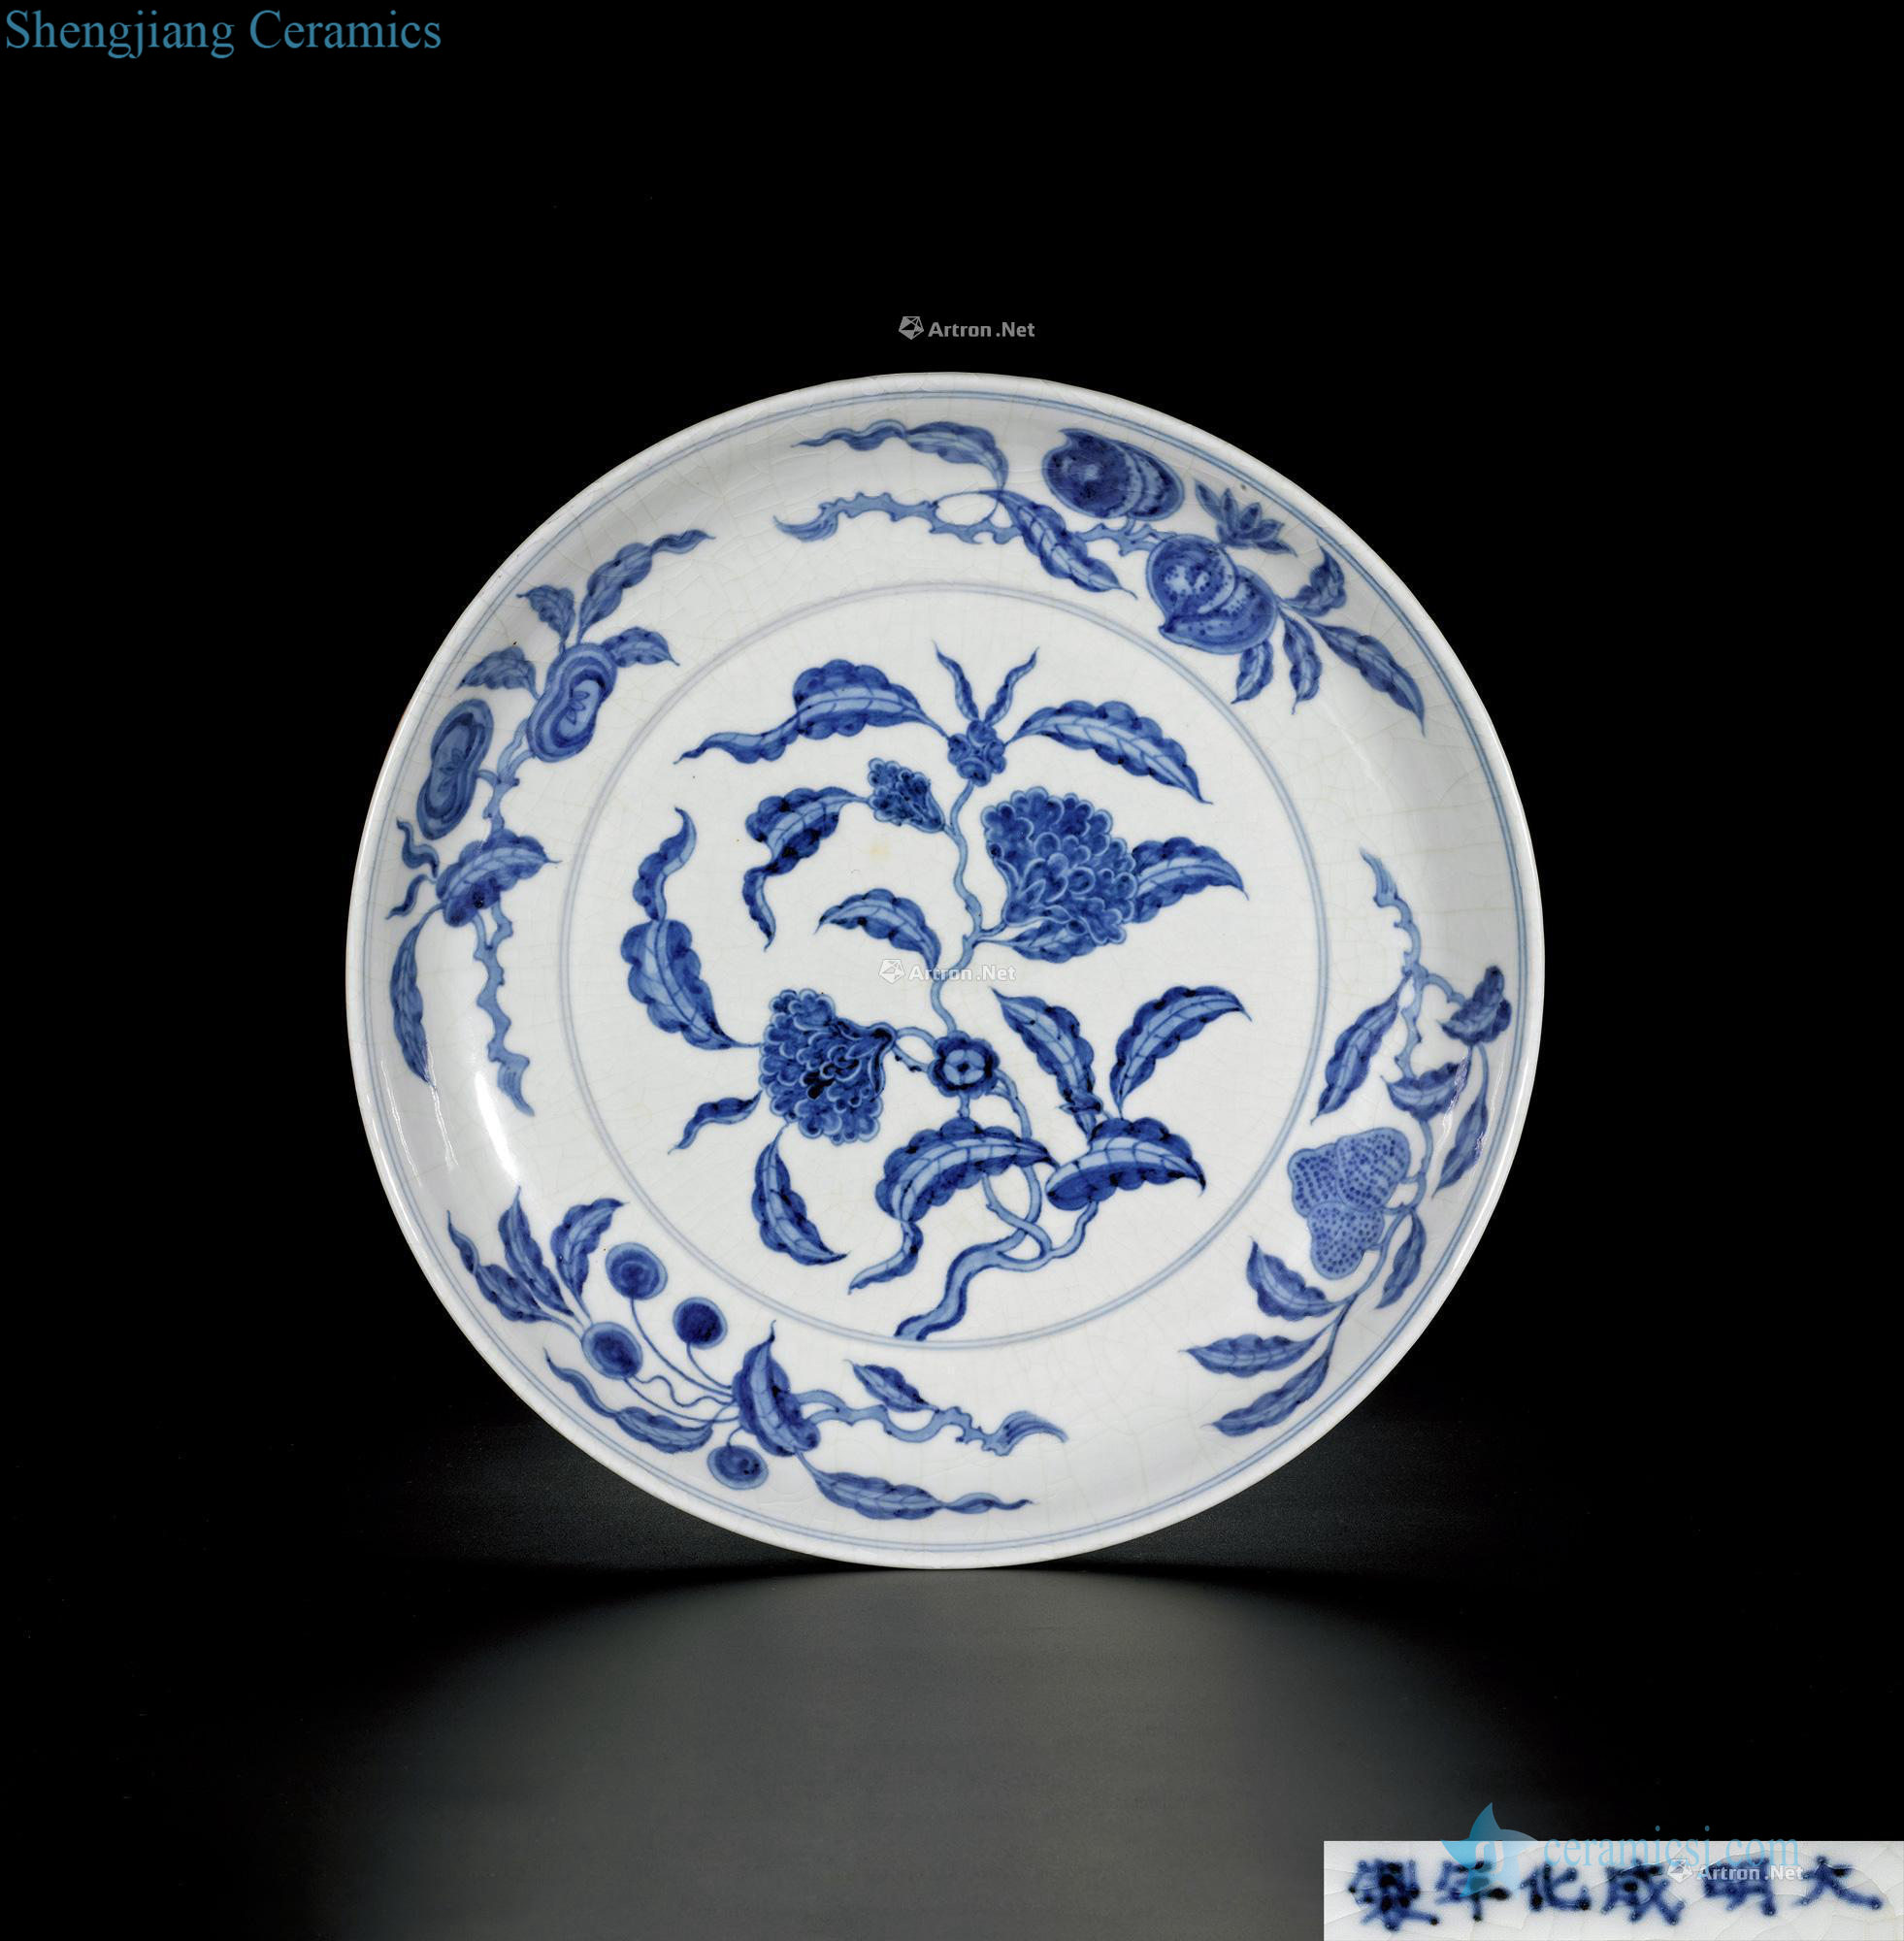 In the Ming dynasty doucai flower tray